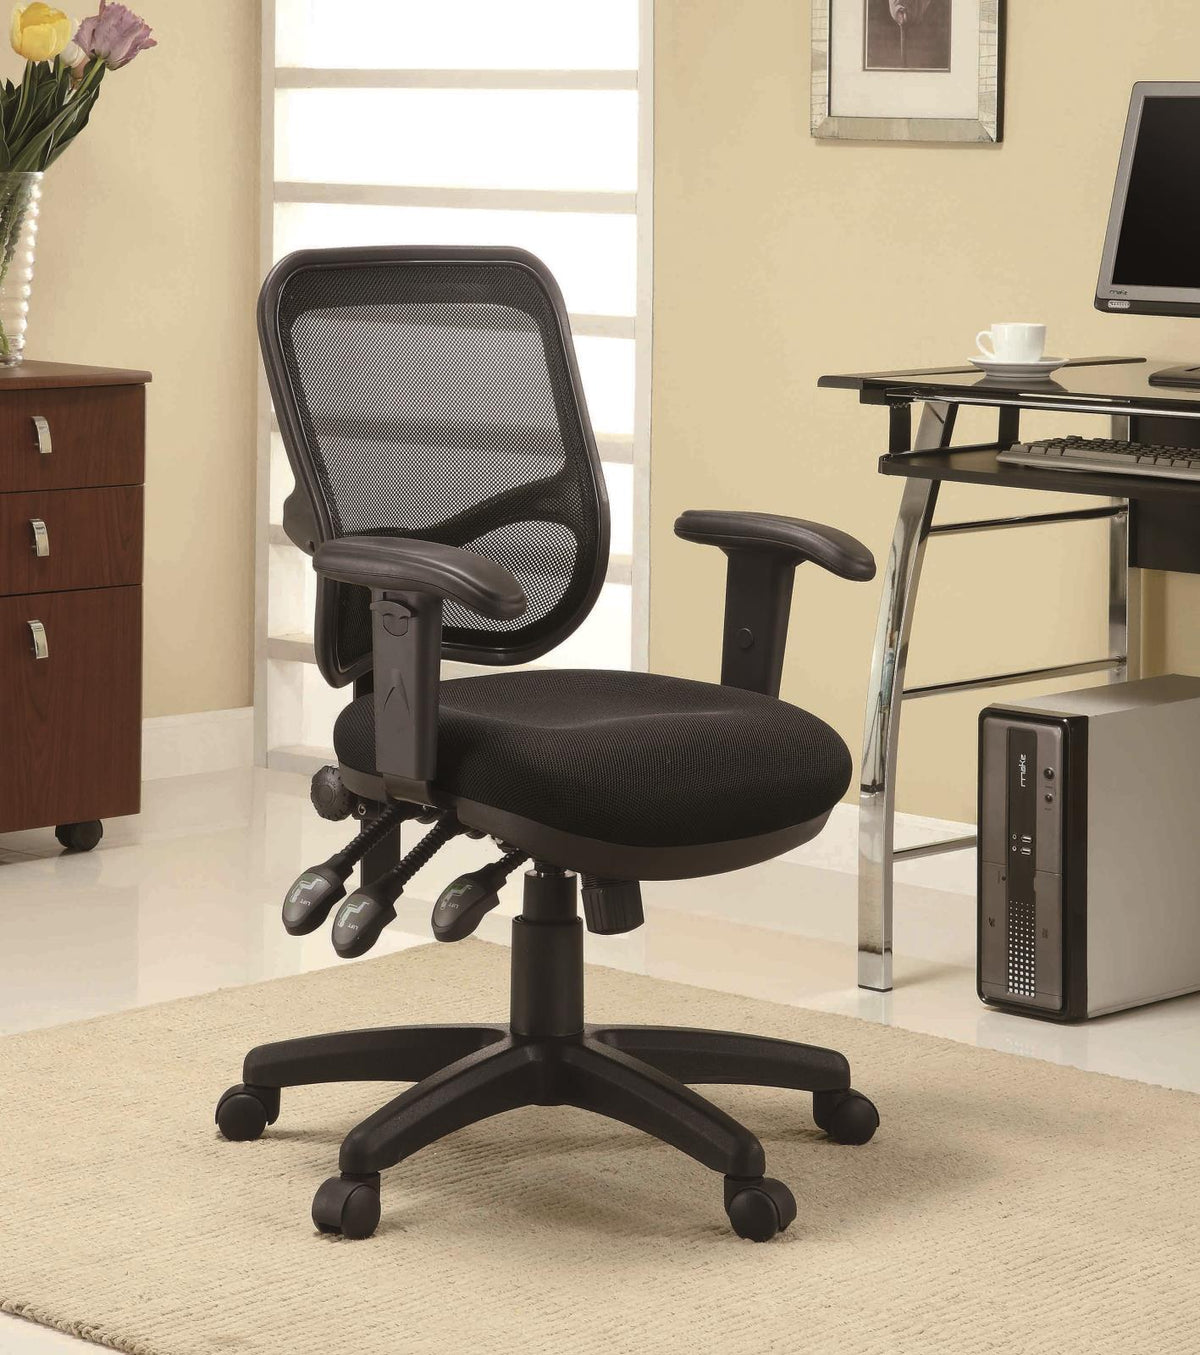 Rollo Adjustable Height Office Chair Black  Las Vegas Furniture Stores